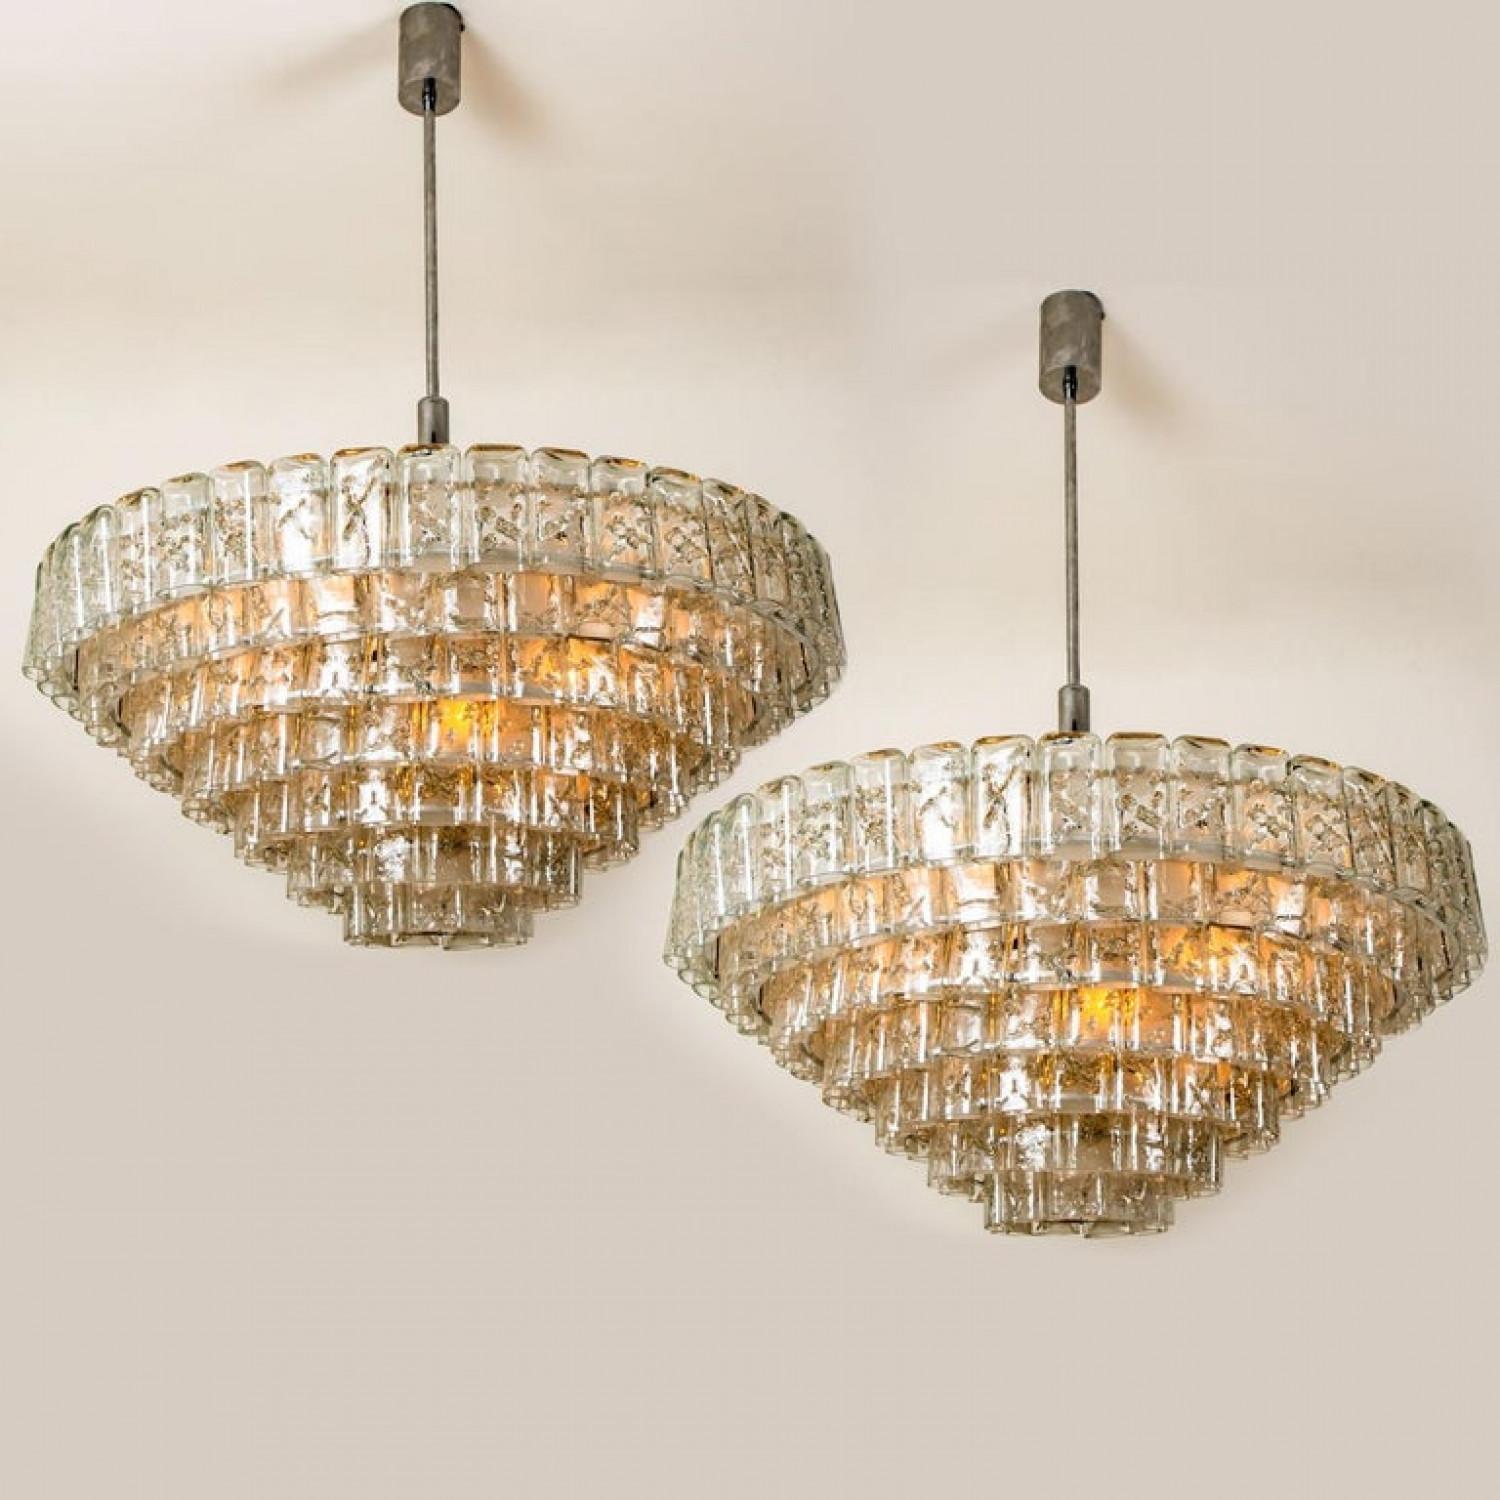 We offer a pair of amazing high-end light fixture. The pair is executed to a high standard. Beautiful craftsmanship. The light fixture not only functions as light source but also as a sculptural component.

The stylish and clean elegance of this